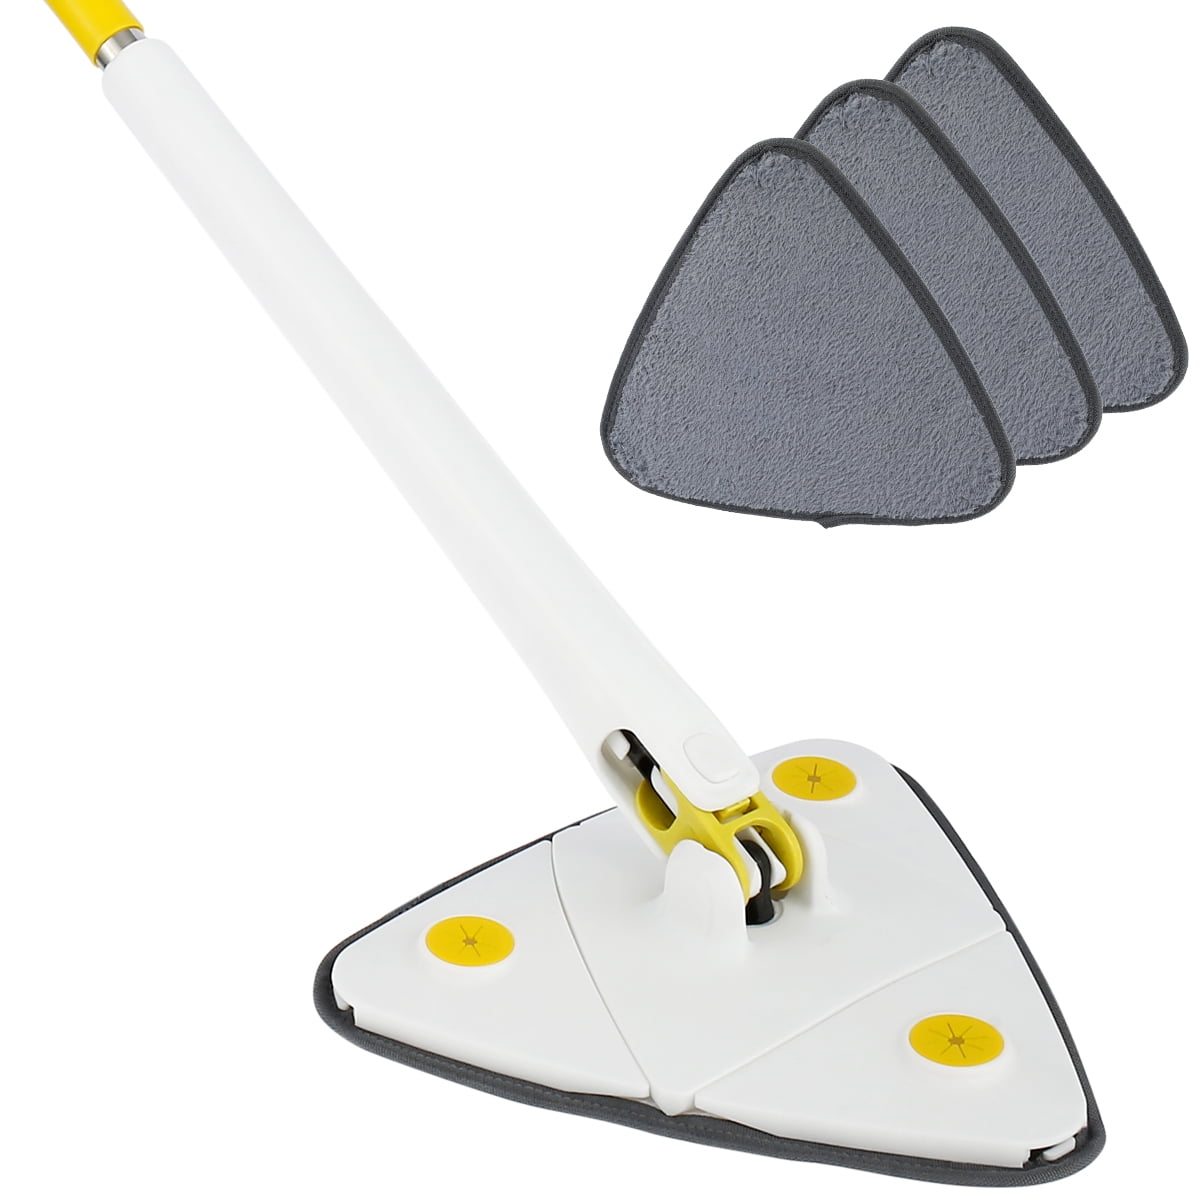 Lieonvis Cleaning Mop,360 Degrees Rotatable Adjustable Wall Mop Cleaner  Extendable 51Inch Triangle Automatic Water Squeezing Mop with 2 Replacement